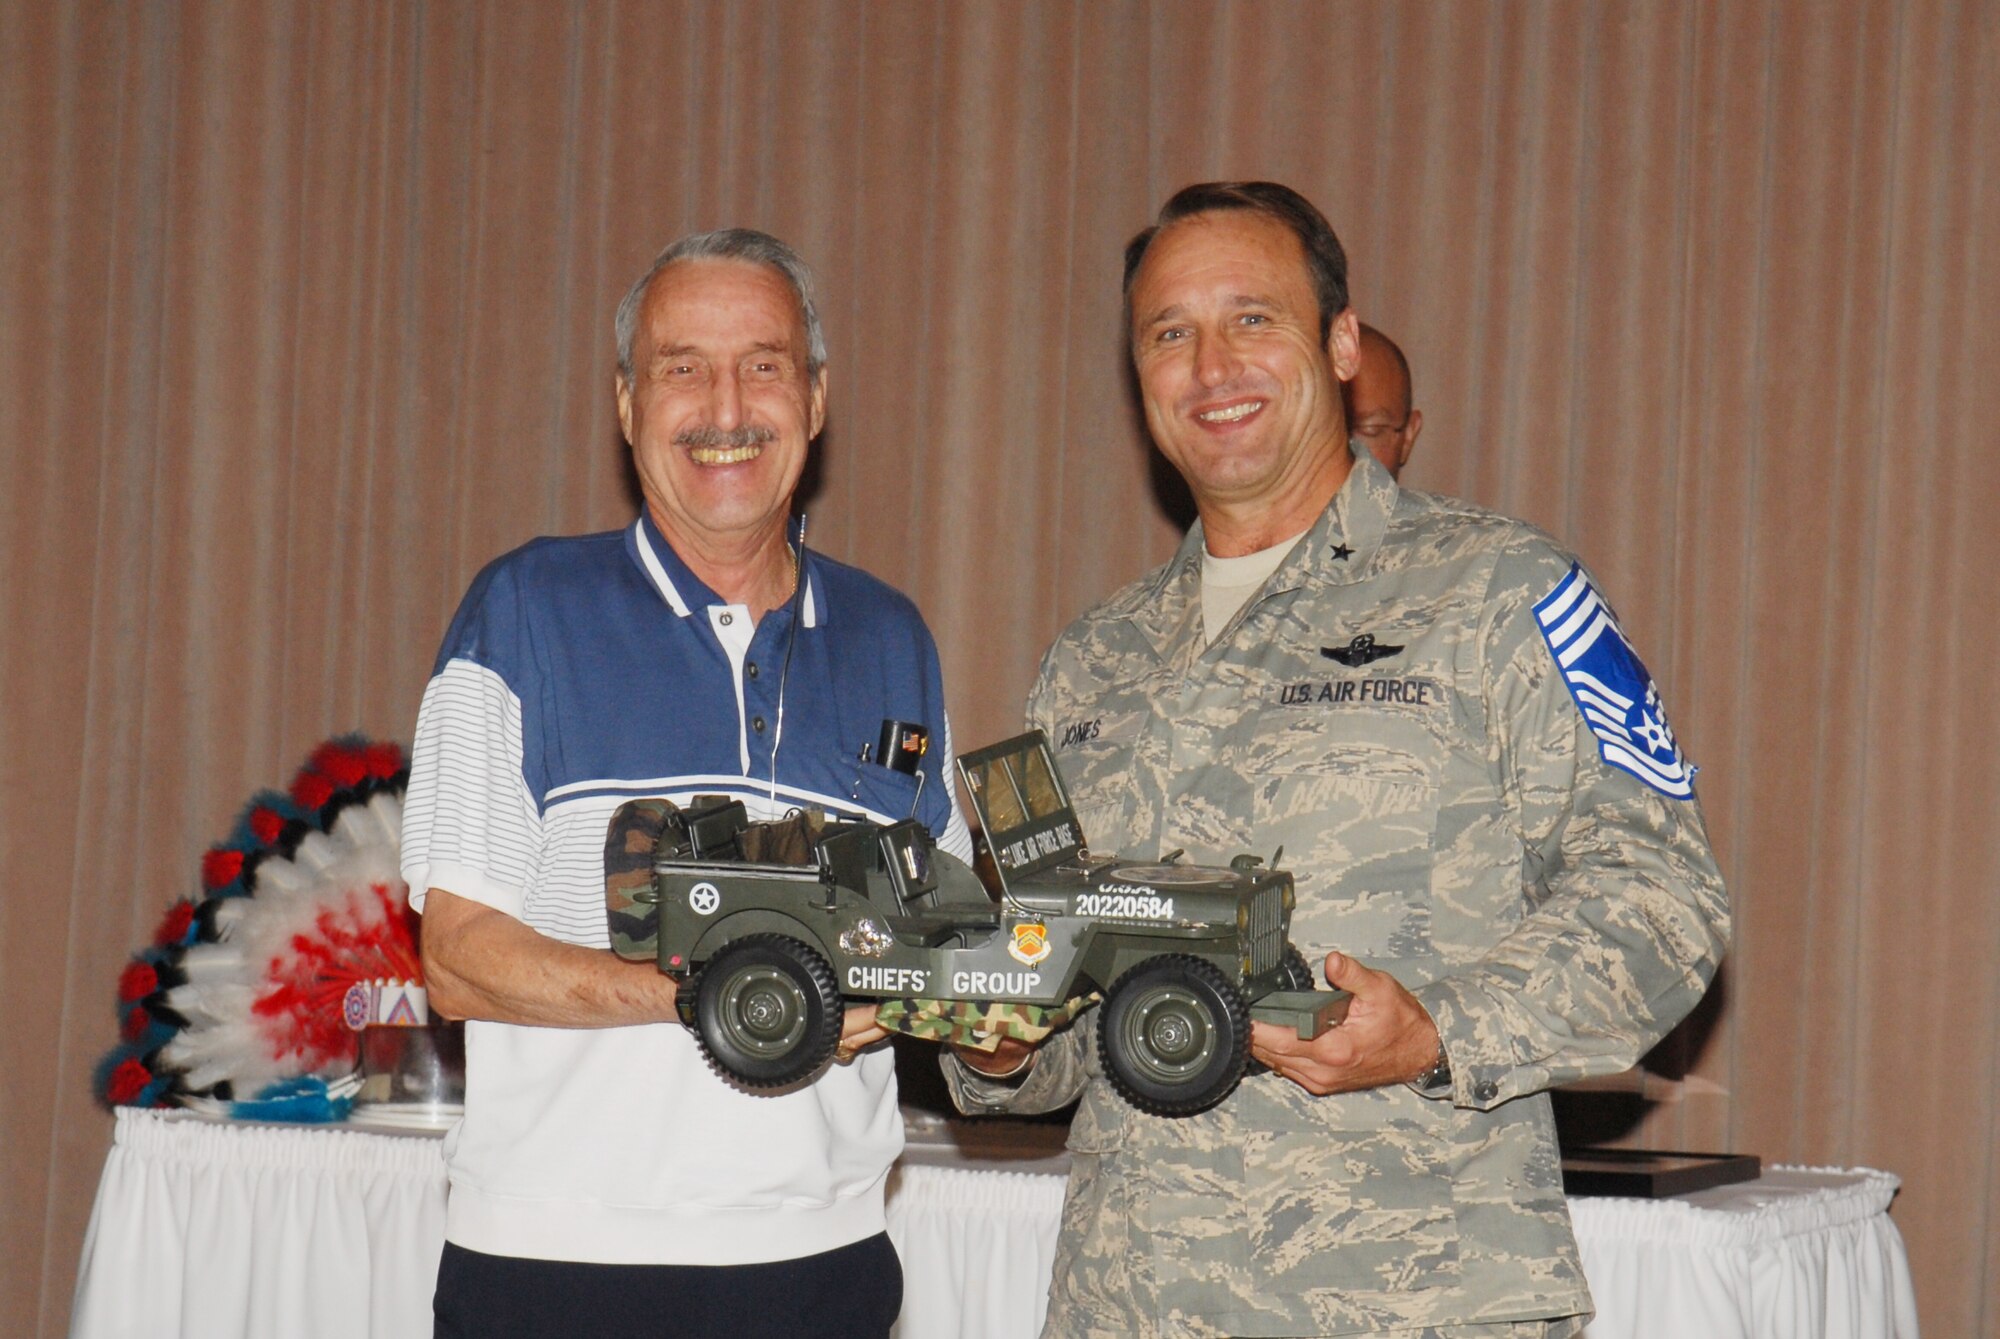 Brig. Gen. Tom Jones, 56th Fighter Wing commander, was recognized as an honorary chief master sergeant May 27. Chief Master Sgt. (ret) Geno Piccoli had the honor of bestowing the Chief’s Group Jeep to General Jones during a private ceremony. The term Jeep has traditionally been used by the military to refer to an individual who is junior or the newest. The Jeep above is symbolic of that tenure and associated with the most recently promoted chief. Therefore, the most recently promoted chief will be addressed by his/her peers as “Jeep” until a more junior chief is promoted. 